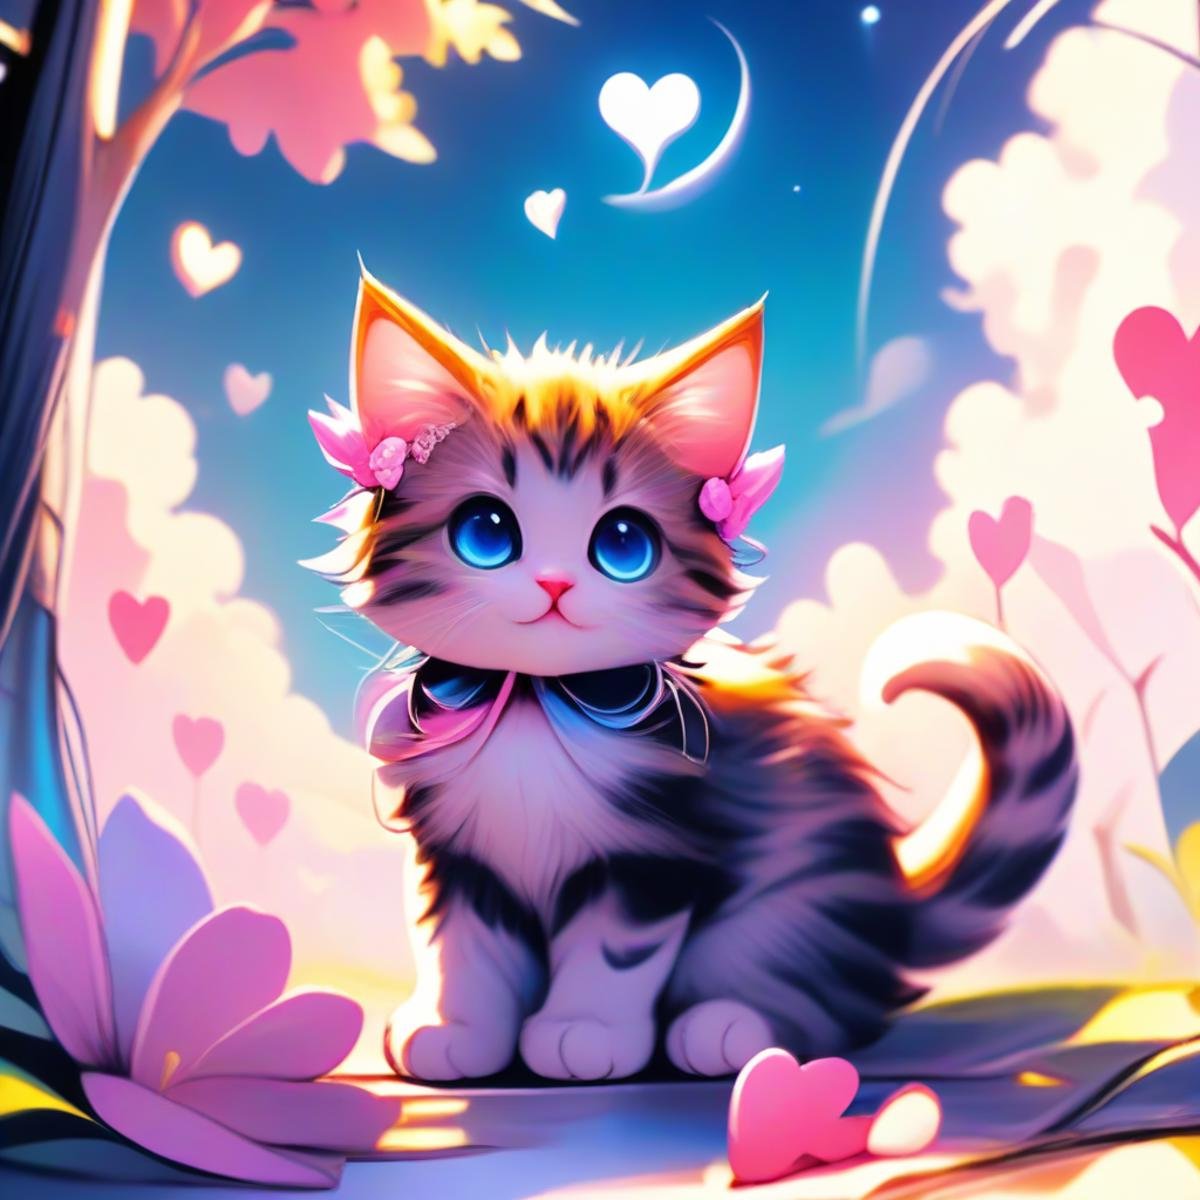 ValentineNatureStyleSDXL,no humans, flowers, water, plant, fantasy, petals, full moon, moon, cloud, colorful, hearts, outdoors, Darling, cute cat animal, sunlight, crescent moon, <lora:ValentineNatureStyleSDXL:1>